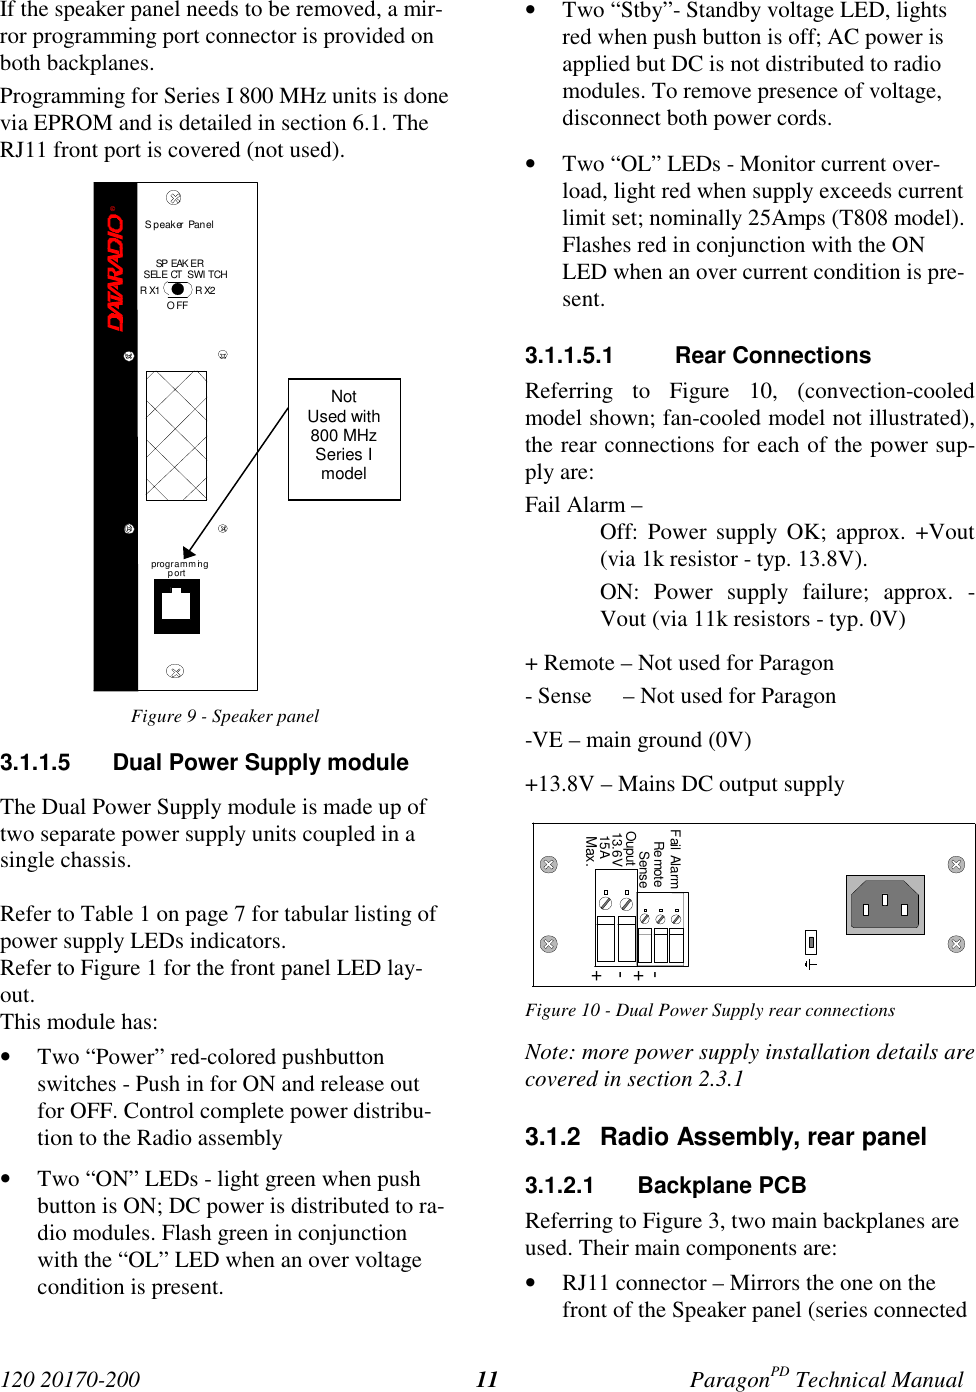 120 20170-200 ParagonPD Technical Manual11If the speaker panel needs to be removed, a mir-ror programming port connector is provided onboth backplanes.Programming for Series I 800 MHz units is donevia EPROM and is detailed in section 6.1. TheRJ11 front port is covered (not used).Figure 9 - Speaker panel3.1.1.5  Dual Power Supply moduleThe Dual Power Supply module is made up oftwo separate power supply units coupled in asingle chassis.Refer to Table 1 on page 7 for tabular listing ofpower supply LEDs indicators.Refer to Figure 1 for the front panel LED lay-out.This module has:• Two “Power” red-colored pushbuttonswitches - Push in for ON and release outfor OFF. Control complete power distribu-tion to the Radio assembly• Two “ON” LEDs - light green when pushbutton is ON; DC power is distributed to ra-dio modules. Flash green in conjunctionwith the “OL” LED when an over voltagecondition is present.• Two “Stby”- Standby voltage LED, lightsred when push button is off; AC power isapplied but DC is not distributed to radiomodules. To remove presence of voltage,disconnect both power cords.• Two “OL” LEDs - Monitor current over-load, light red when supply exceeds currentlimit set; nominally 25Amps (T808 model).Flashes red in conjunction with the ONLED when an over current condition is pre-sent.3.1.1.5.1 Rear ConnectionsReferring to Figure 10, (convection-cooledmodel shown; fan-cooled model not illustrated),the rear connections for each of the power sup-ply are:Fail Alarm –Off: Power supply OK; approx. +Vout(via 1k resistor - typ. 13.8V).ON: Power supply failure; approx. -Vout (via 11k resistors - typ. 0V)+ Remote – Not used for Paragon- Sense     – Not used for Paragon-VE – main ground (0V)+13.8V – Mains DC output supplyFigure 10 - Dual Power Supply rear connectionsNote: more power supply installation details arecovered in section 2.3.13.1.2  Radio Assembly, rear panel3.1.2.1 Backplane PCBReferring to Figure 3, two main backplanes areused. Their main components are:• RJ11 connector – Mirrors the one on thefront of the Speaker panel (series connected15A +-OuputSense +-Re moteFail Alarm13.6VMax.®S peaker  Panelprogramm ingportRX2RX1OFFSP EAK ERSELE CT  SWI TCHNotUsed with800 MHzSeries Imodel